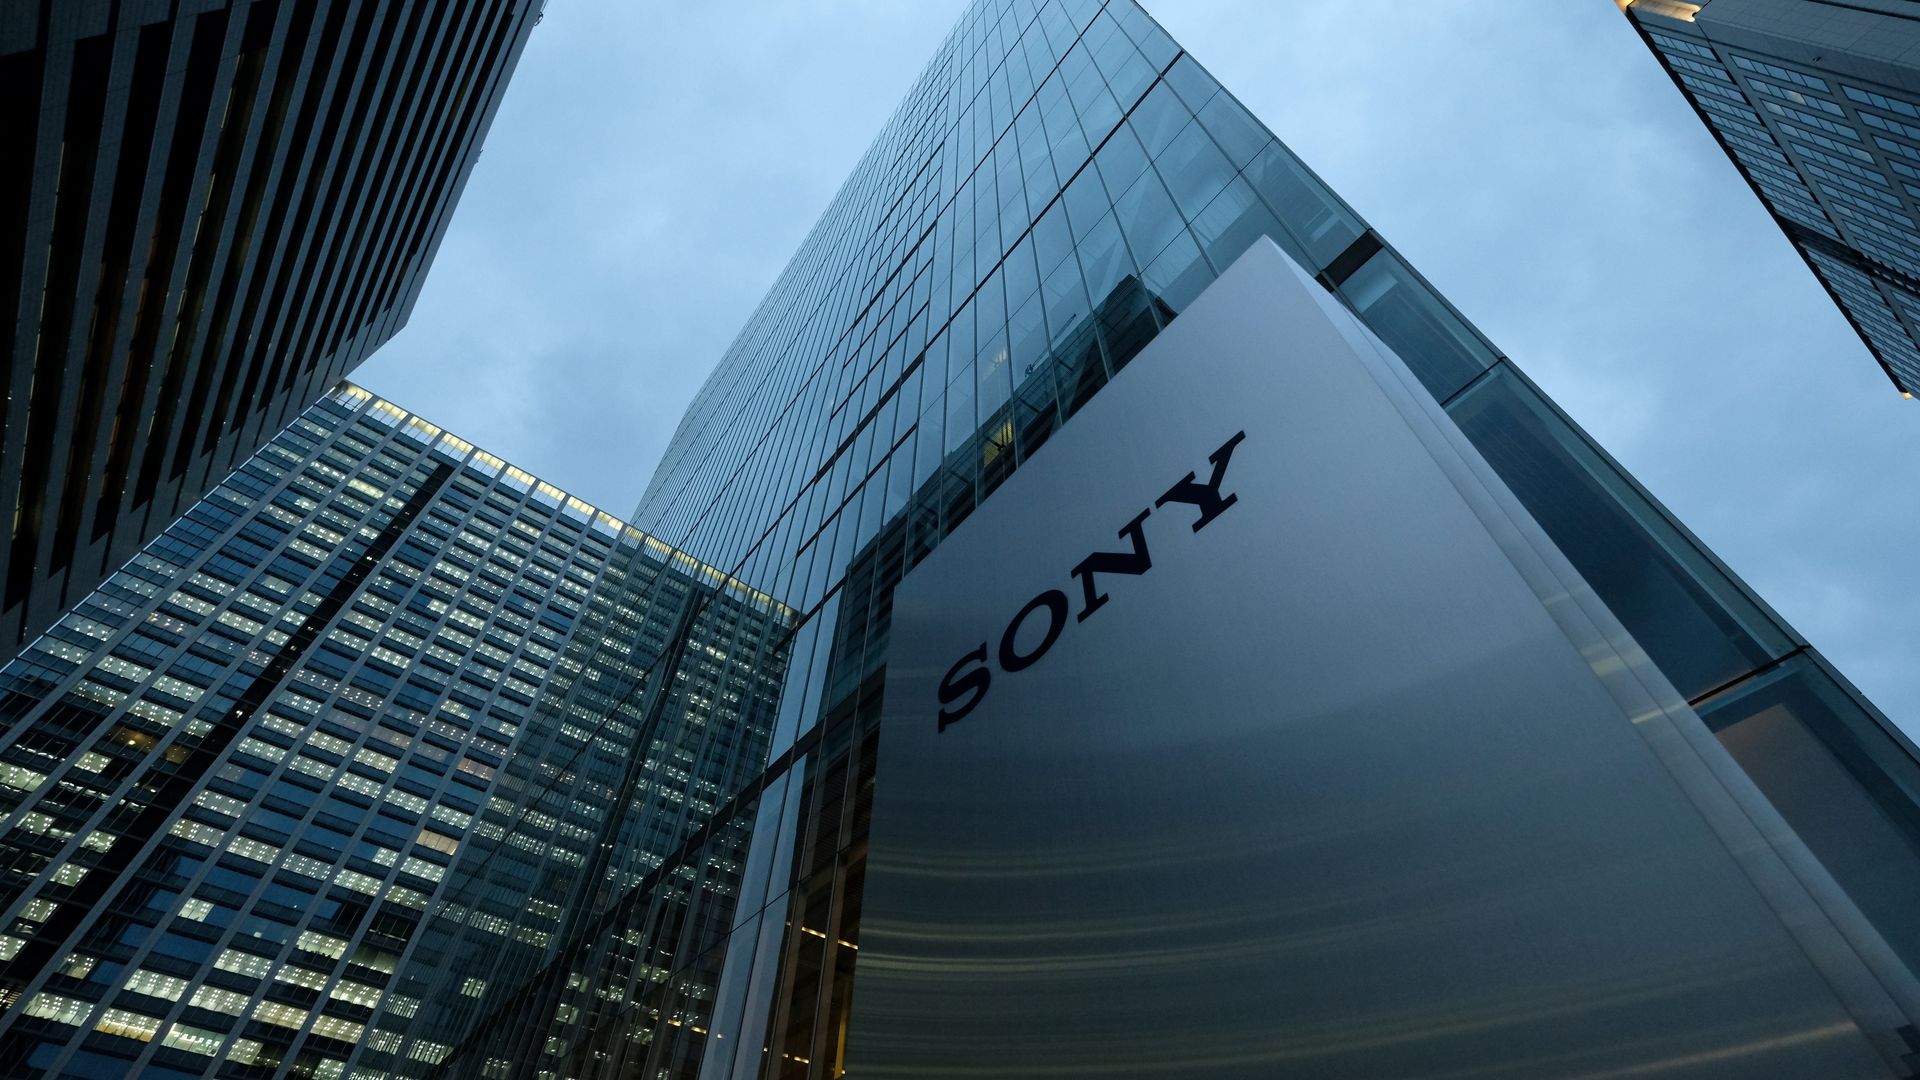 Sony Corp. headquarters in Tokyo, Japan.